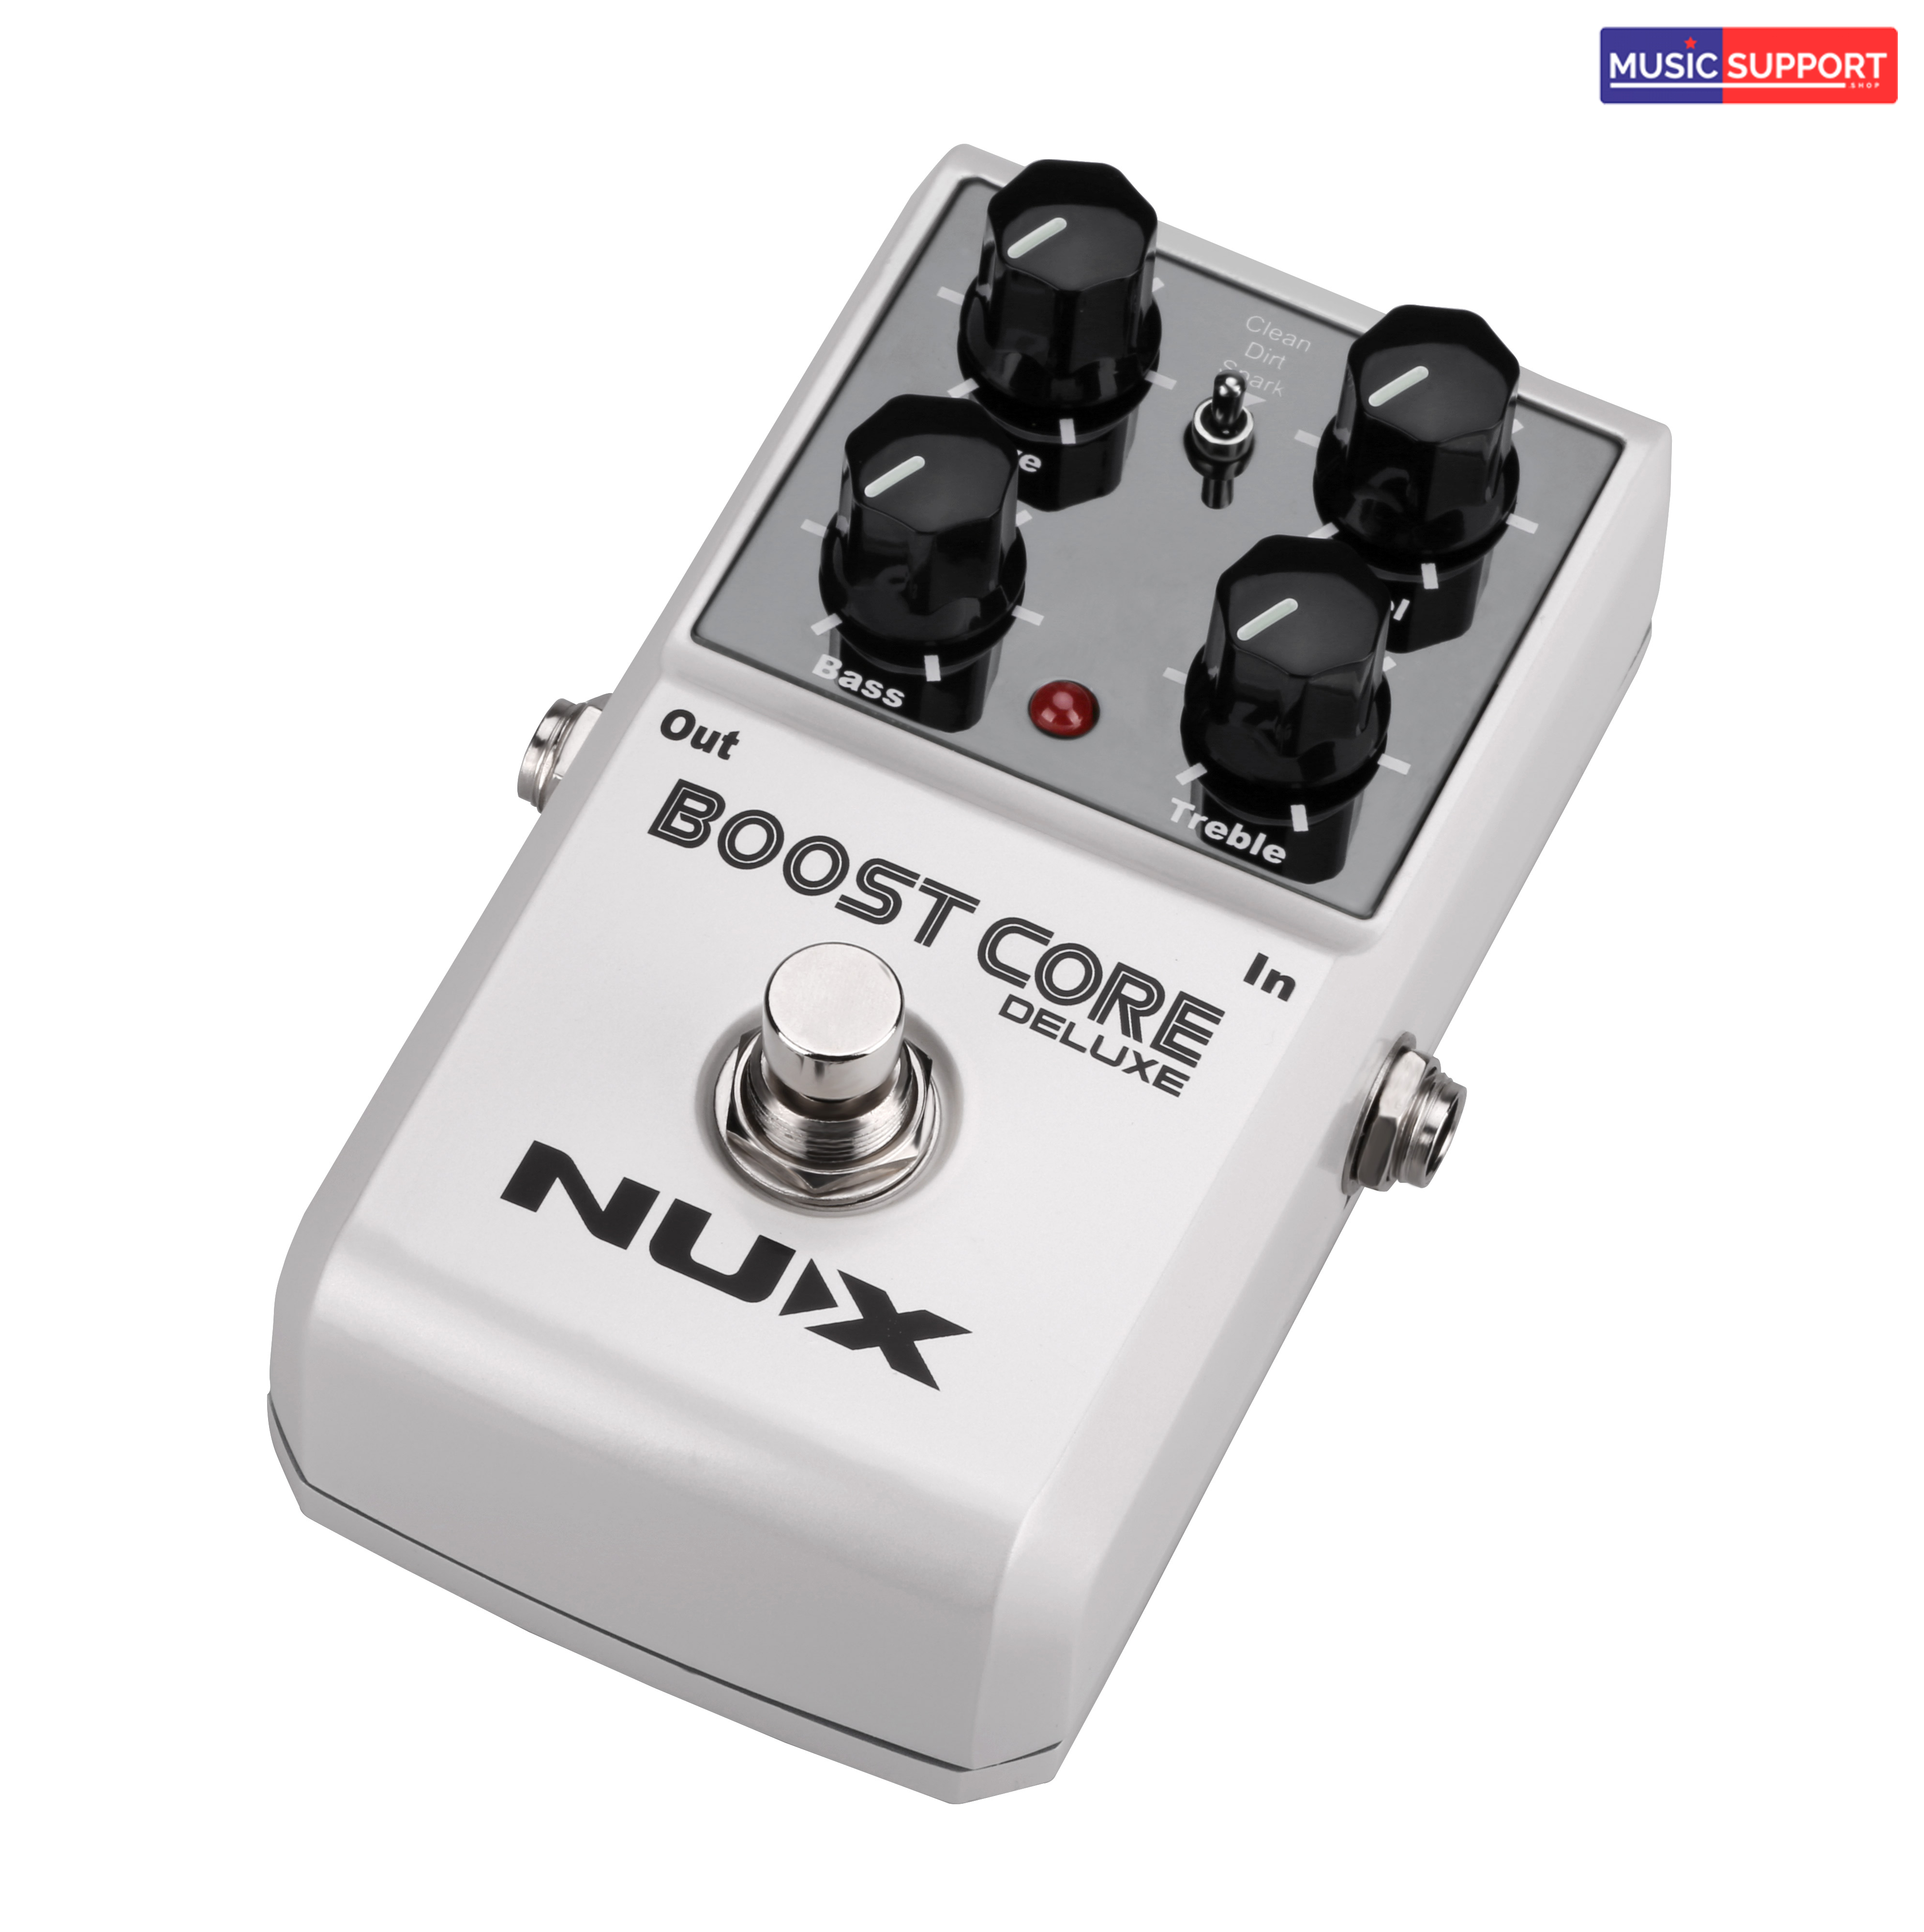 NUX Boost Core Deluxe Guitar Effect Pedal - ผ่อนได้ไม่ใช้บัตร